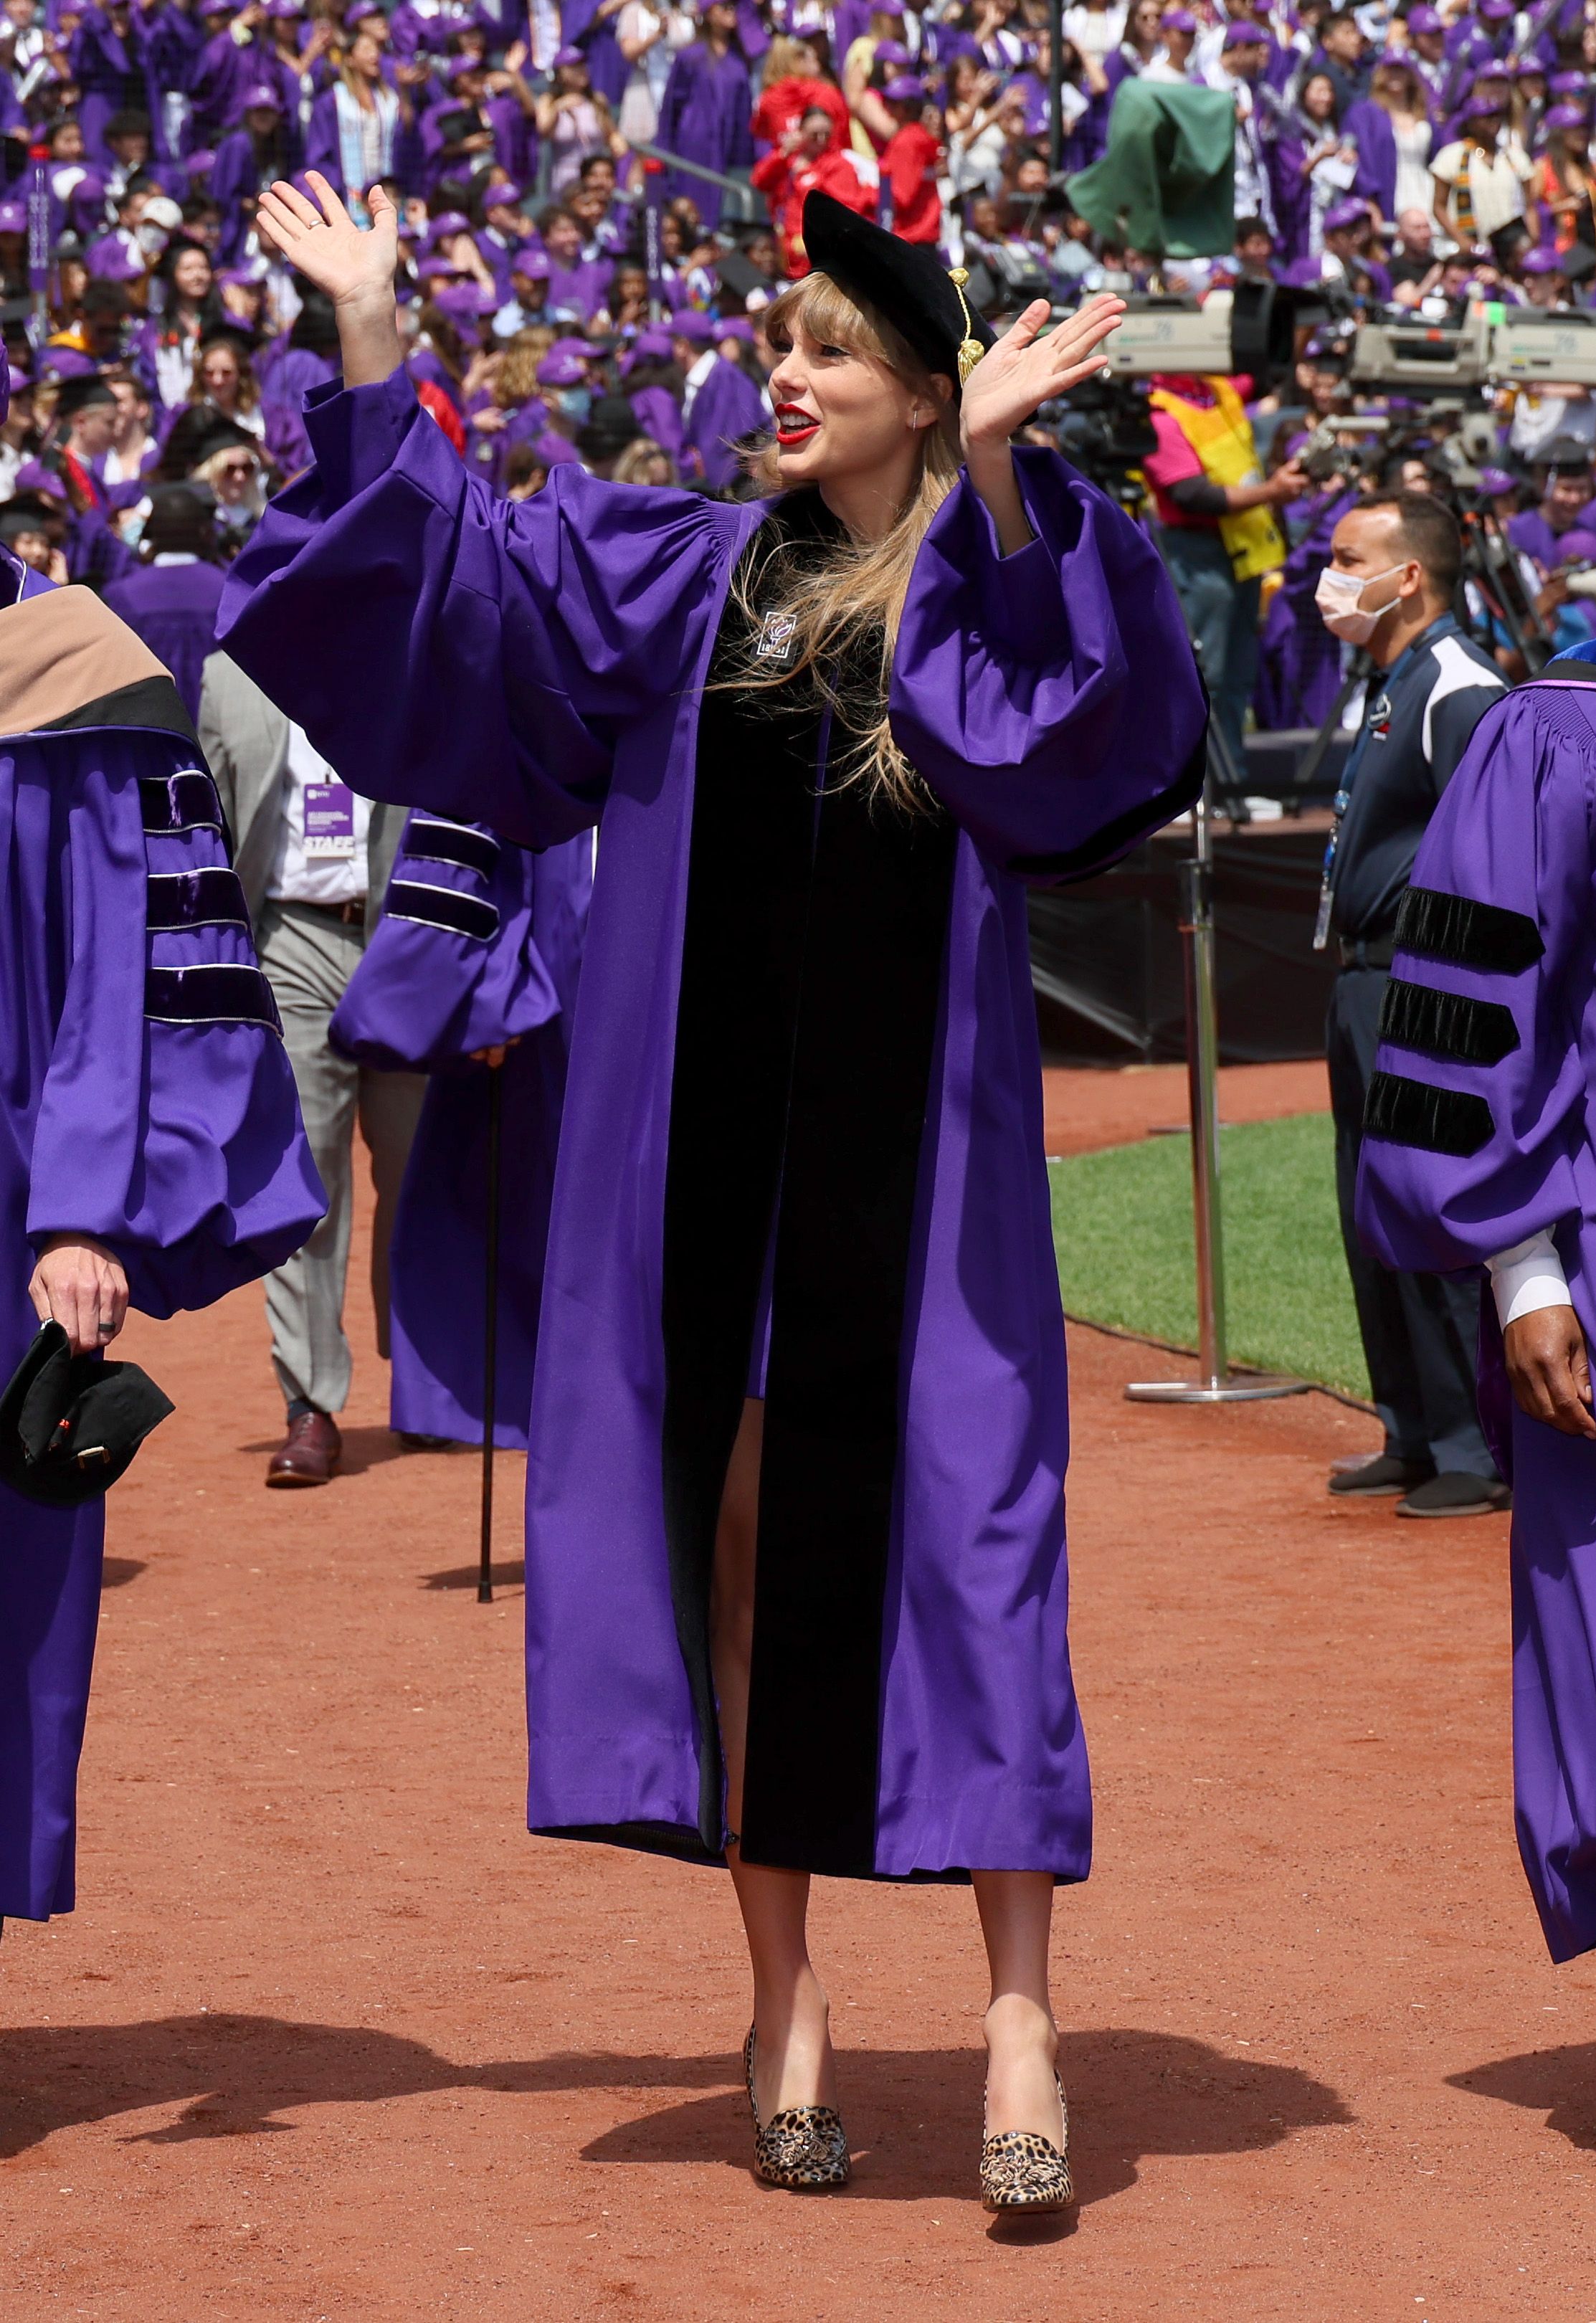 Taylor Swift Receives Honorary Doctorate Degree From NYU - Teacher Related